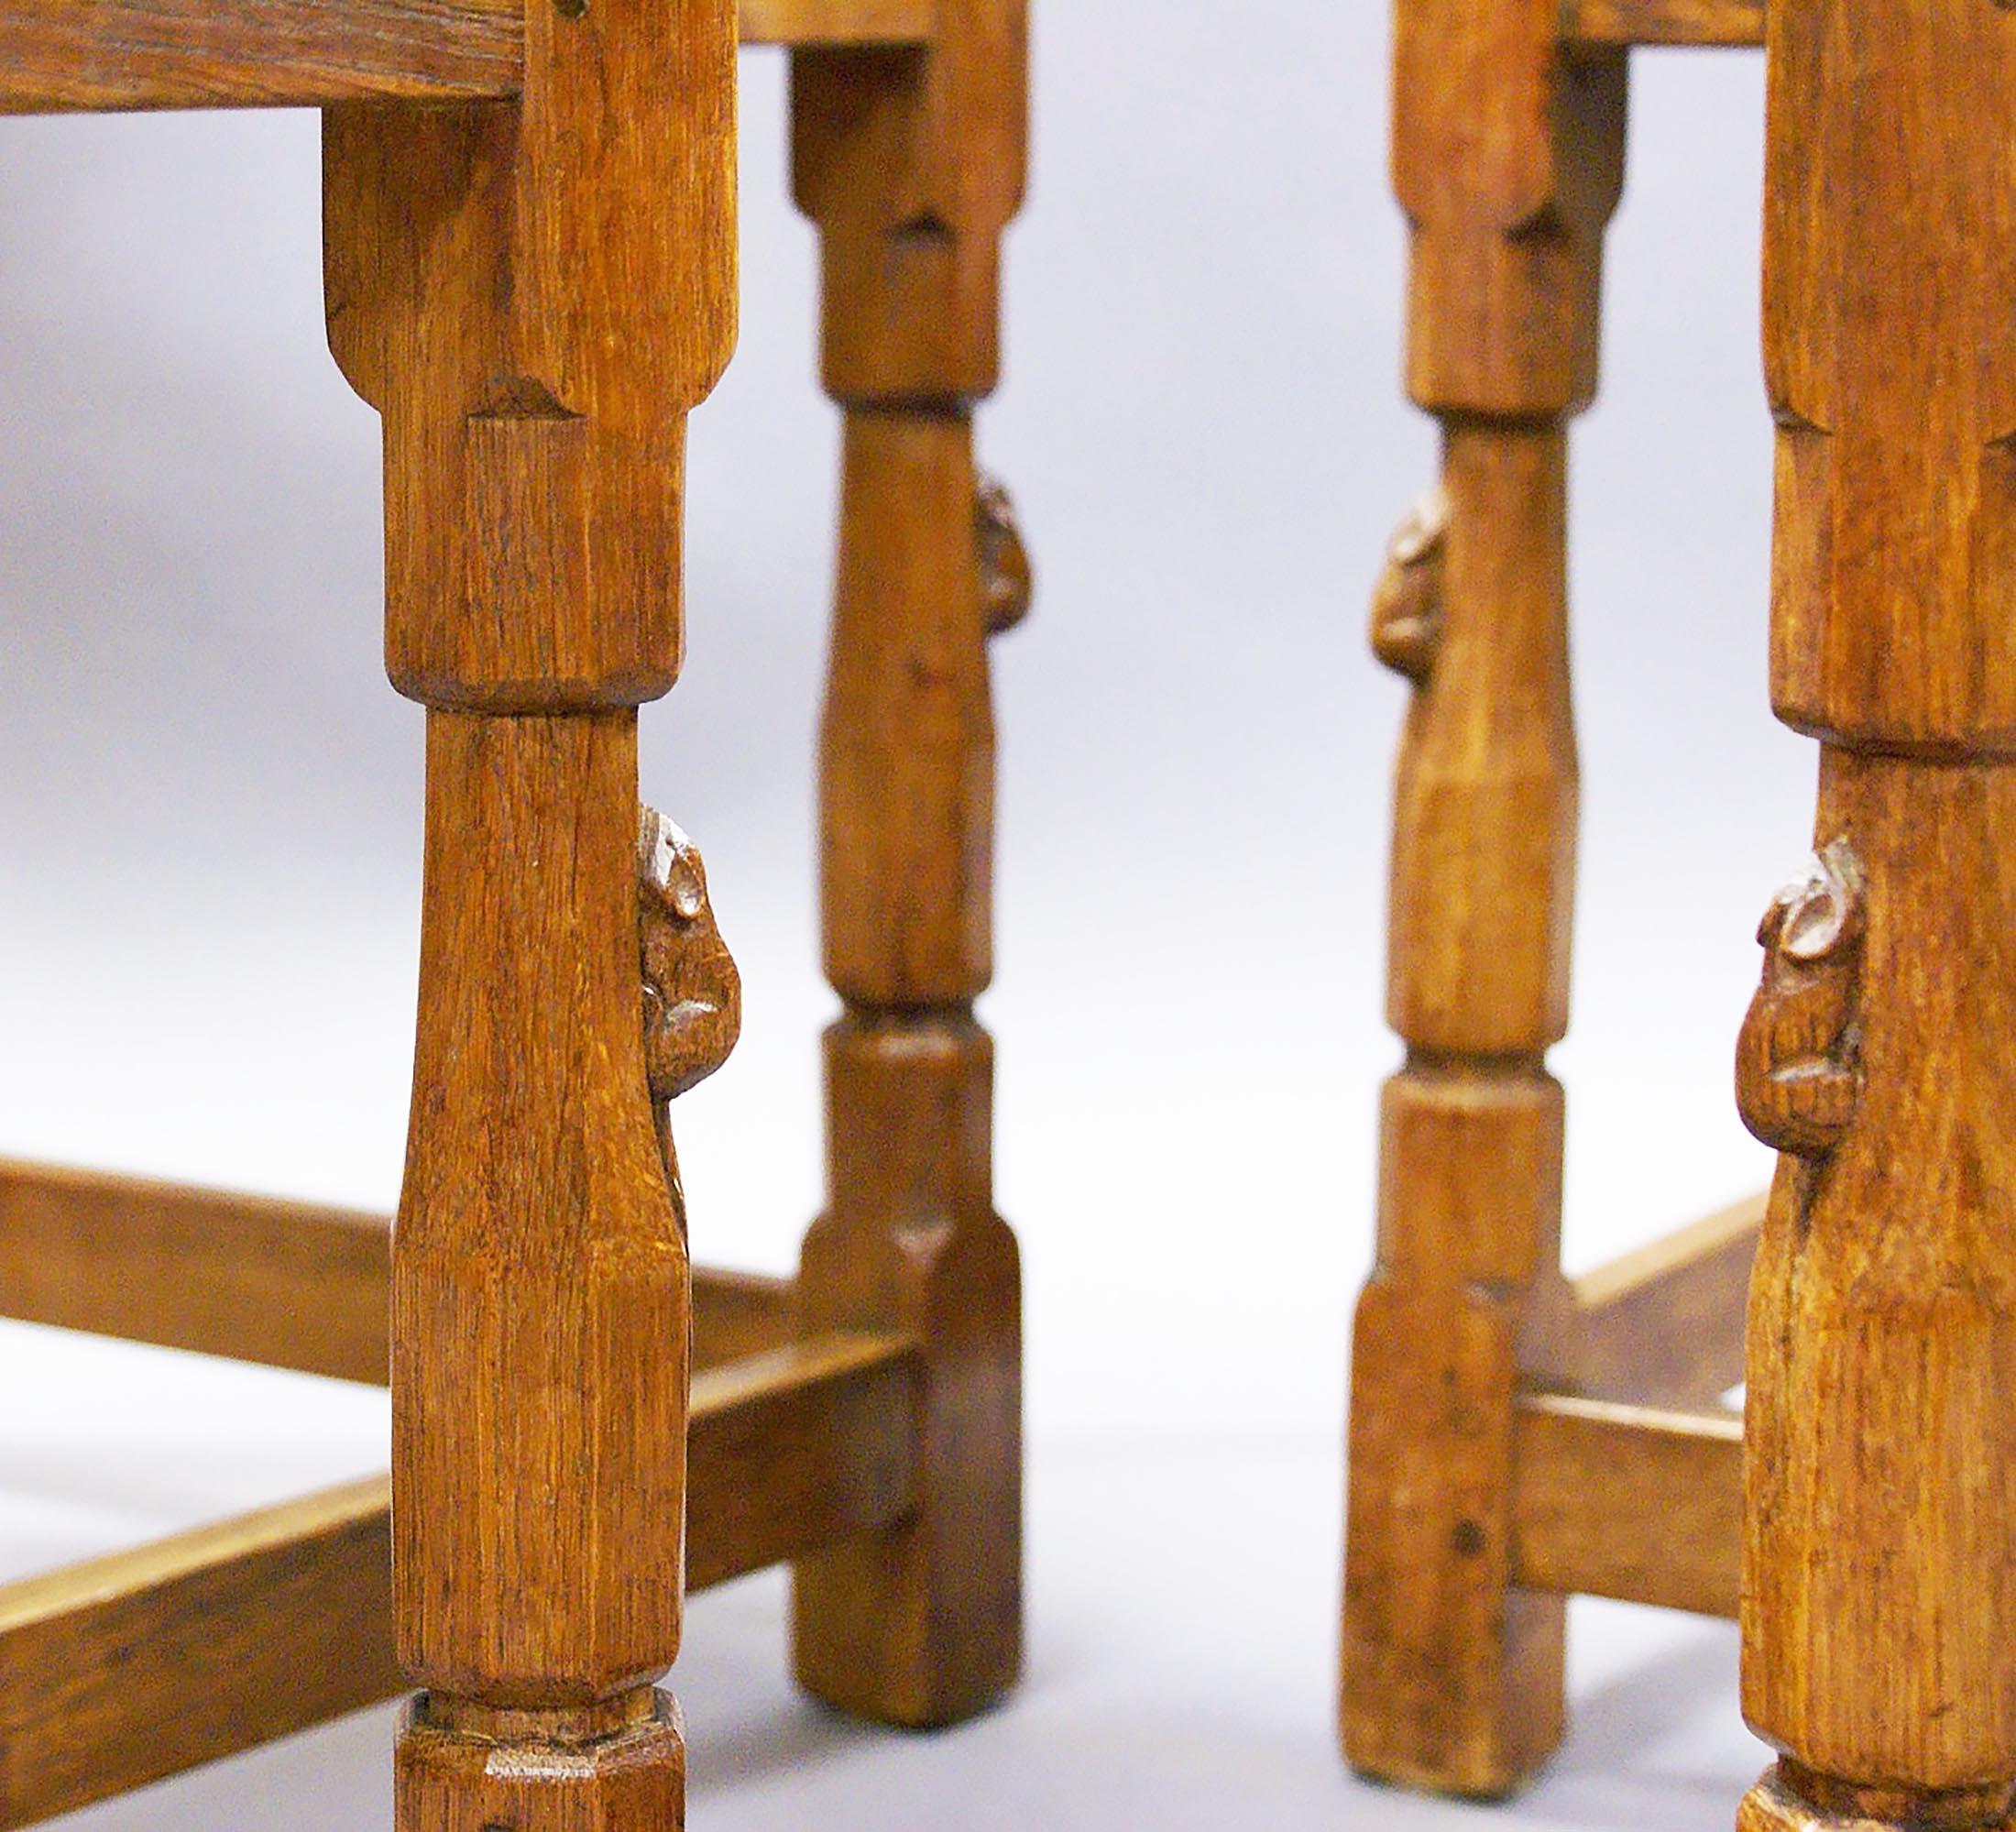 This unadorned yet very attractive set of four oak side chairs were made by Robert Thompson, a prolific and well-known furniture maker of the period. A small carved mouse was his signature and trademark, which eventually became his nickname.
Robert